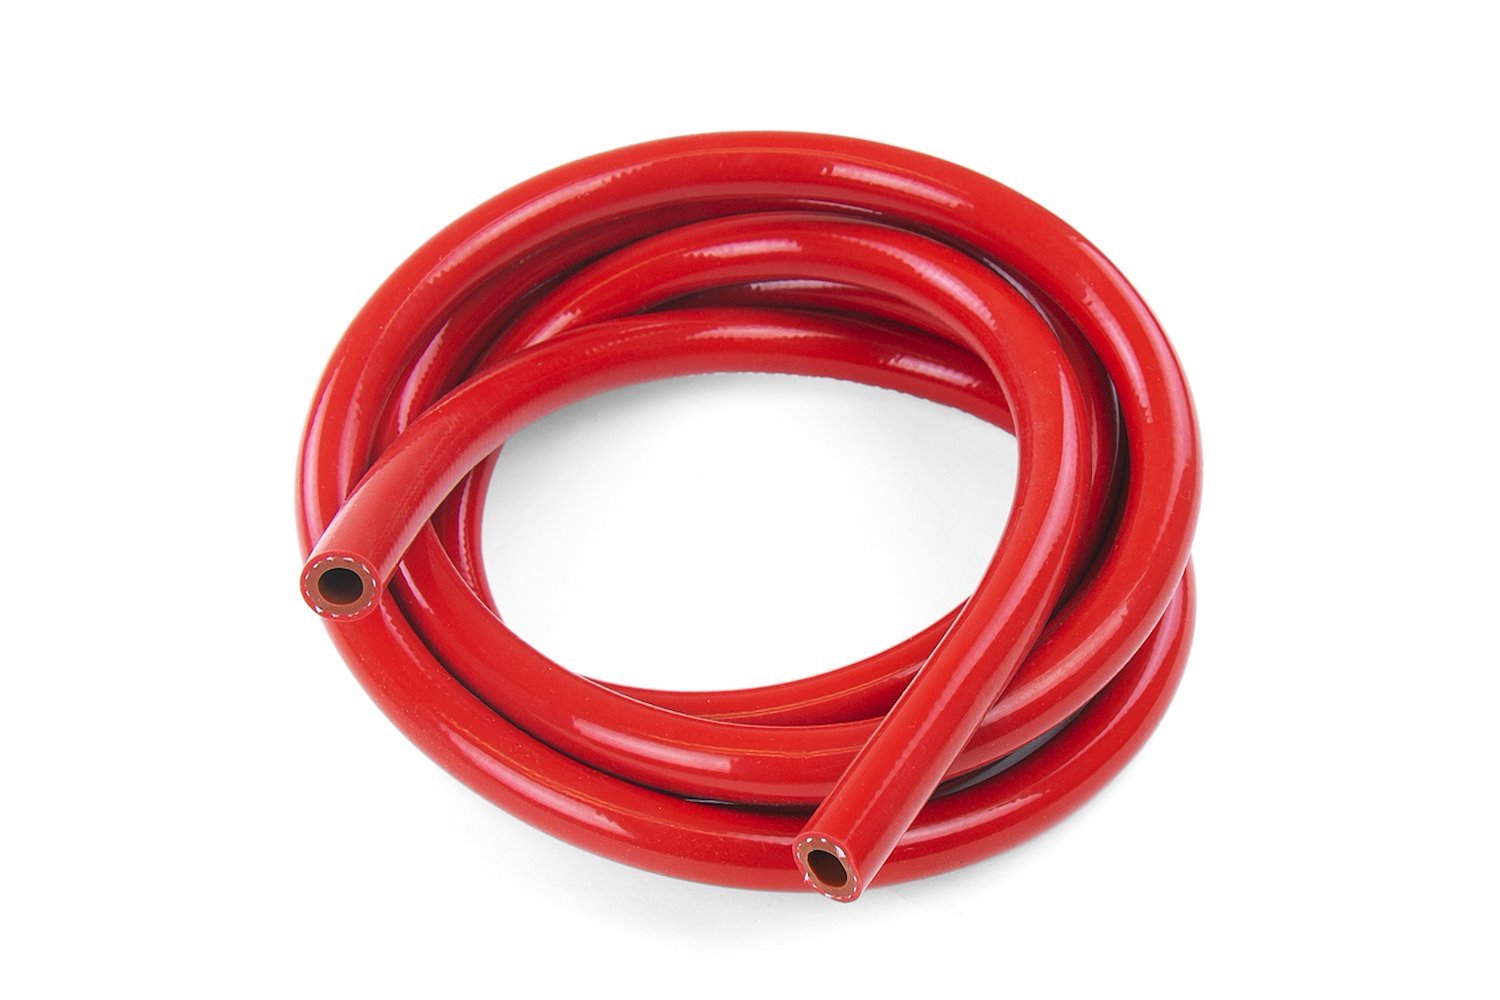 HTHH-038-REDx10 Silicone Heater Hose Tubing, High-Temp 1-Ply Reinforced, 3/8 in. ID, 10 ft. Roll, Red